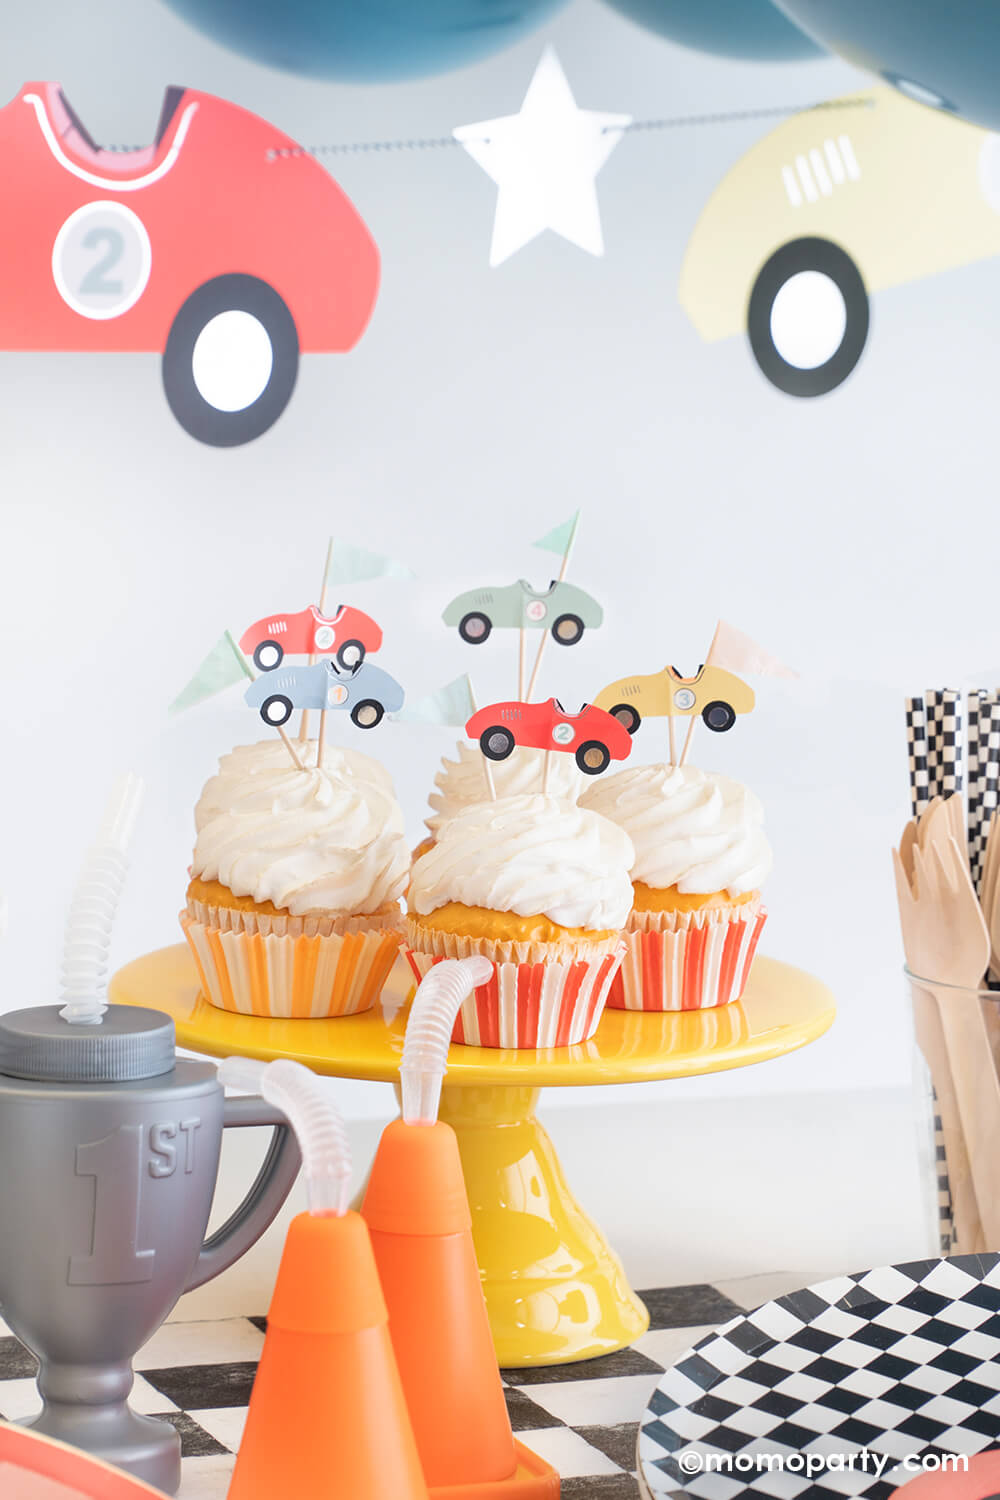 A festive kid's race car party set up featuring some cupcakes decorated with Momo Party's race car cupcake kit that comes with vintage race car toppers and flag toppers in pastel colors, along with orange and red striped cupcake wrappers. Around the cupcakes are some cone shaped and trophy shaped tumbler sippers and round checkered plates, table runner and party straws. Above the table is Meri Meri's race car party garland with some party balloons.